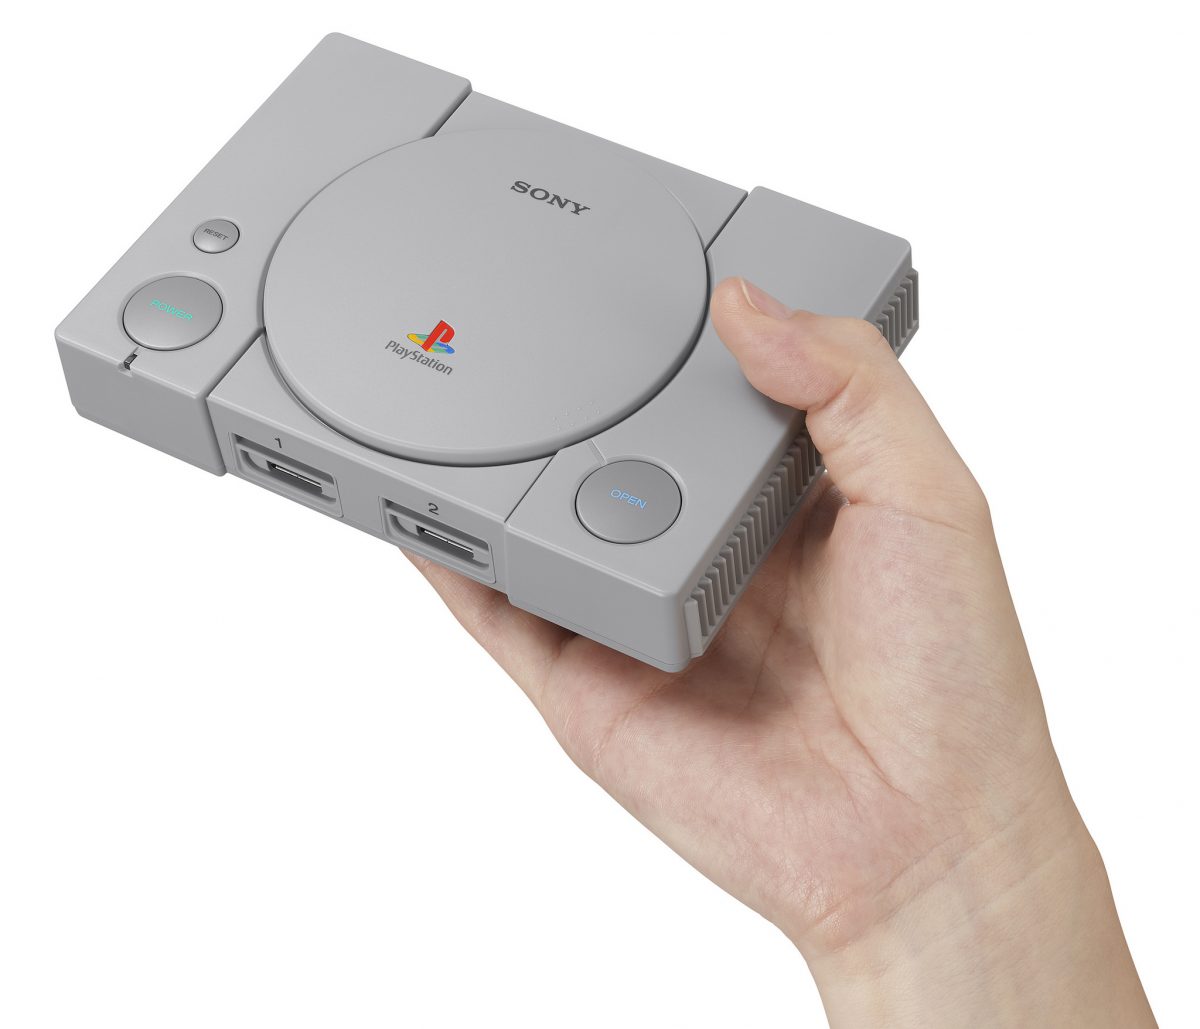 Sony reveals the PlayStation Classic, coming this year